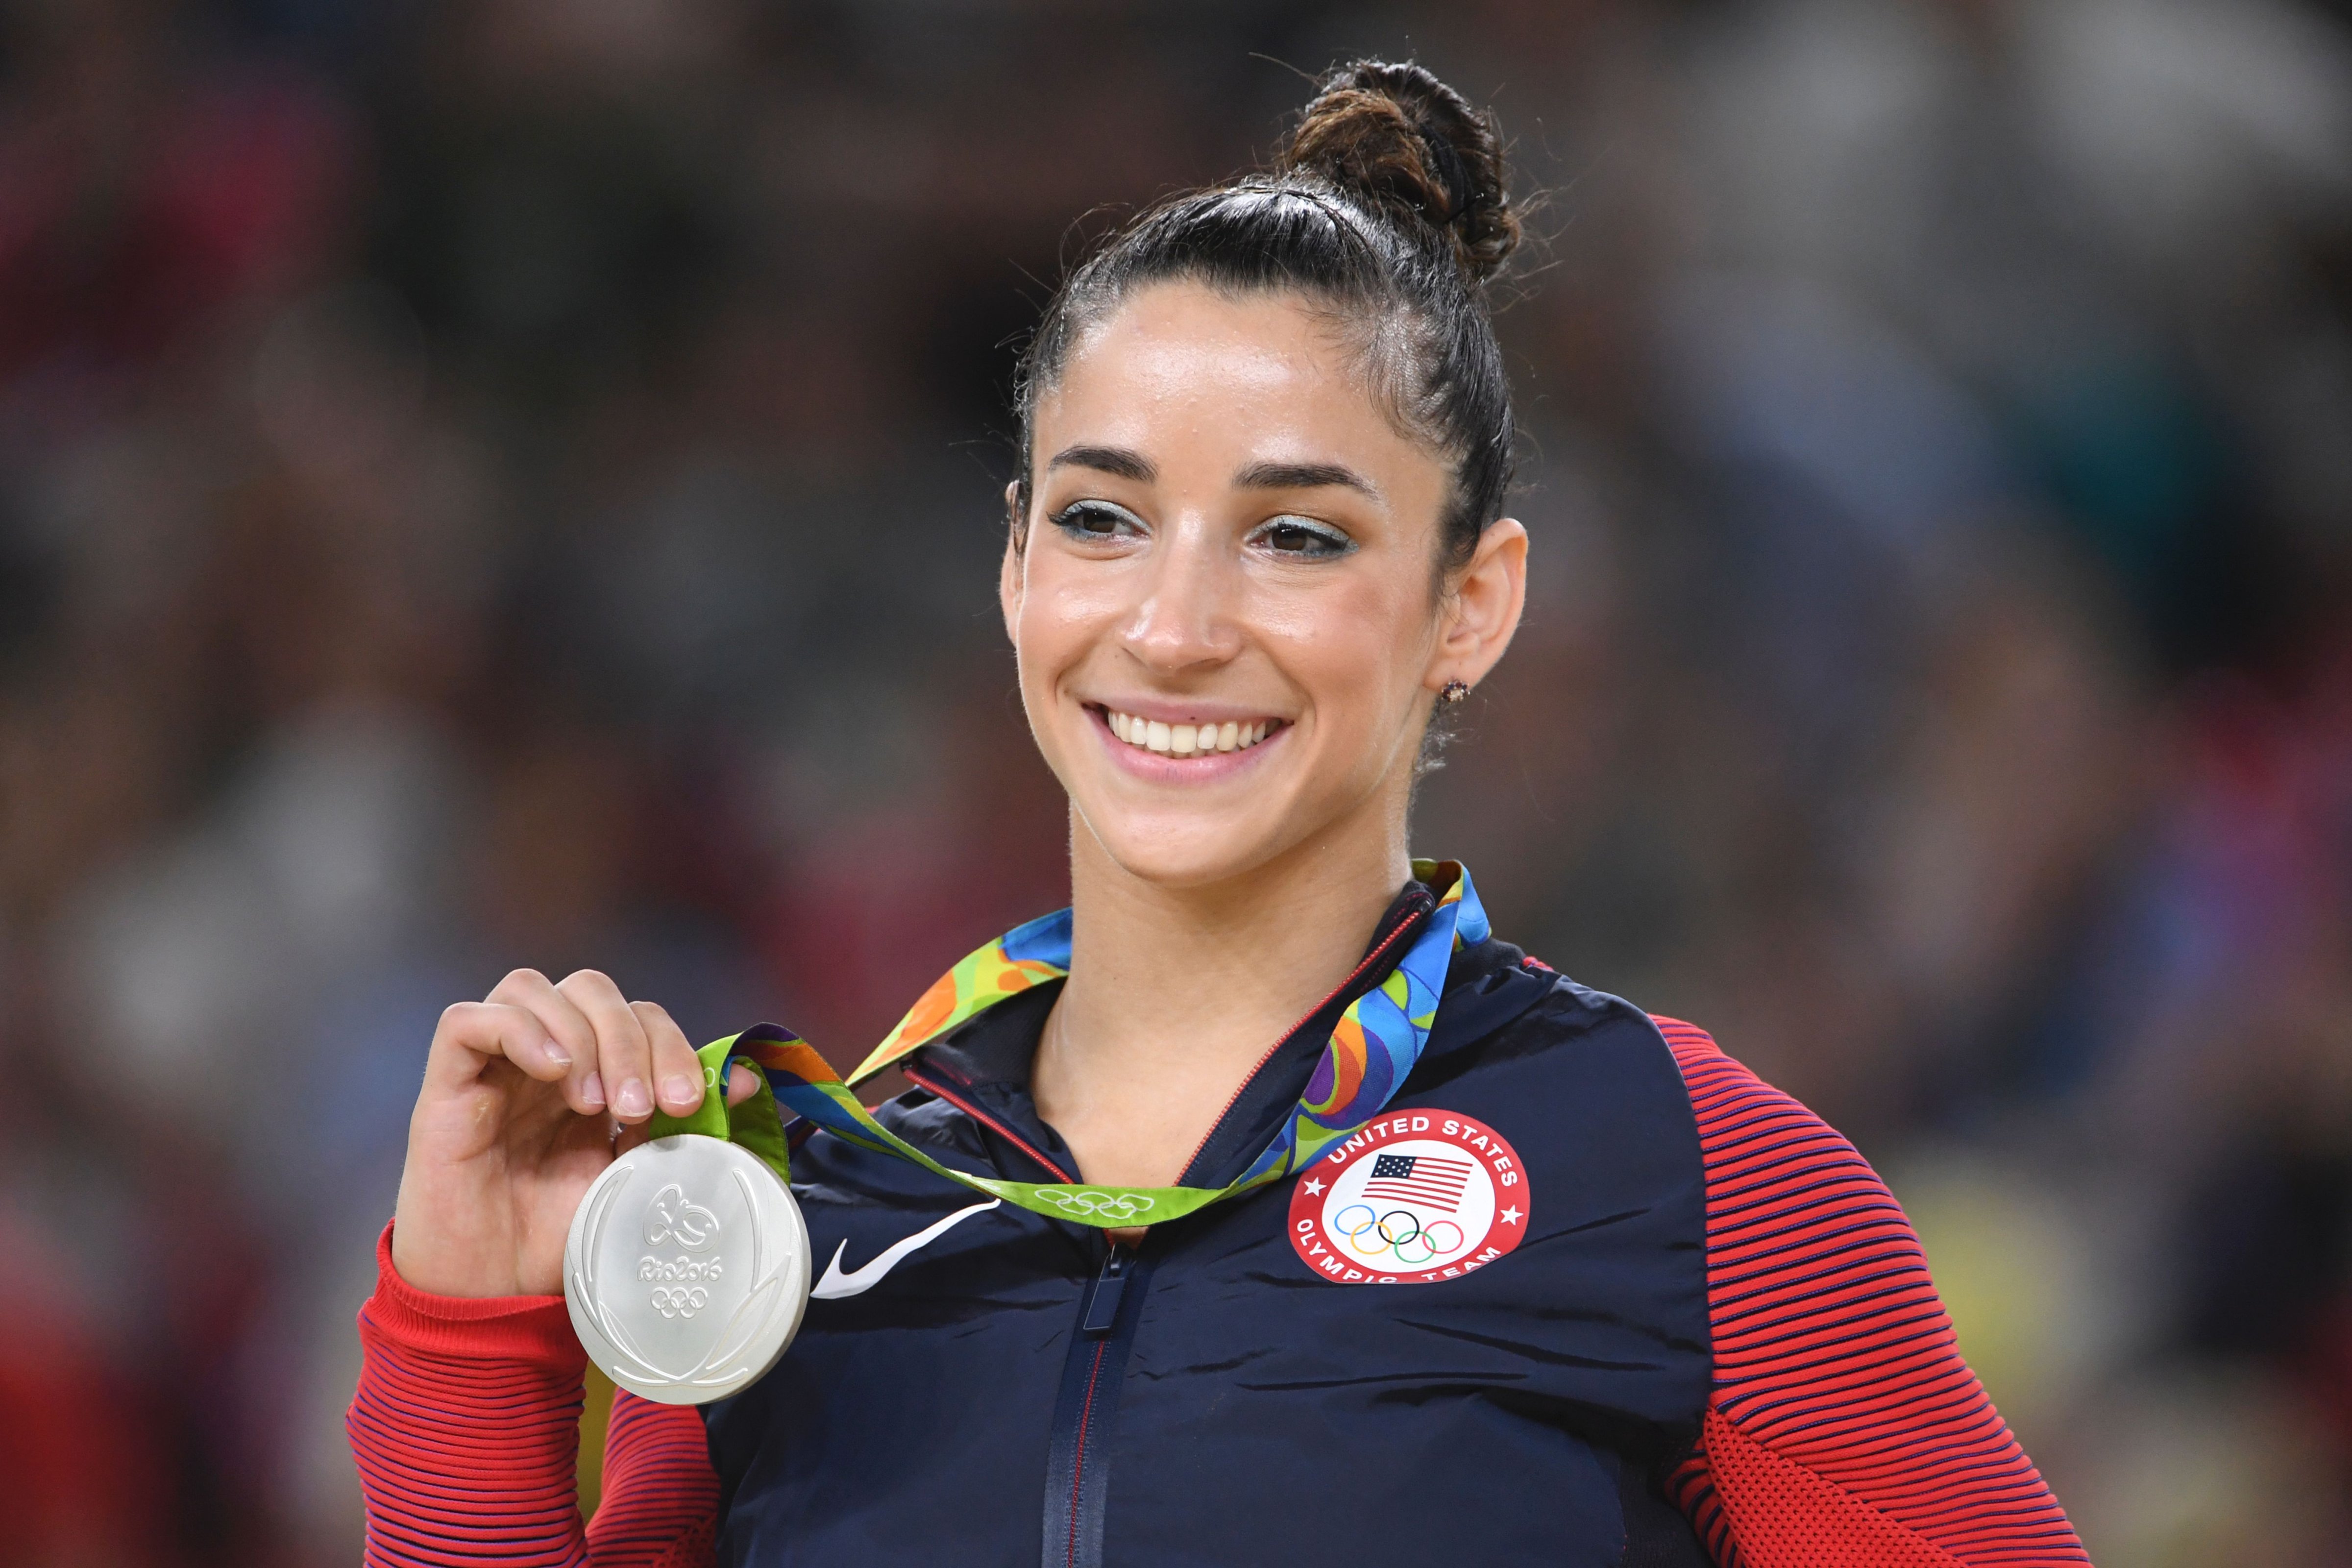 US gymnast Alexandra Raisman celebrates on the podium of the women's floor event final of the Artistic Gymnastics at the Olympic Arena during the Rio 2016 Olympic Games in Rio de Janeiro on August 16, 2016. / AFP / Toshifumi KITAMURA        (Photo credit should read TOSHIFUMI KITAMURA/AFP/Getty Images) (Toshifumi Kitamura&mdash;Getty Images)